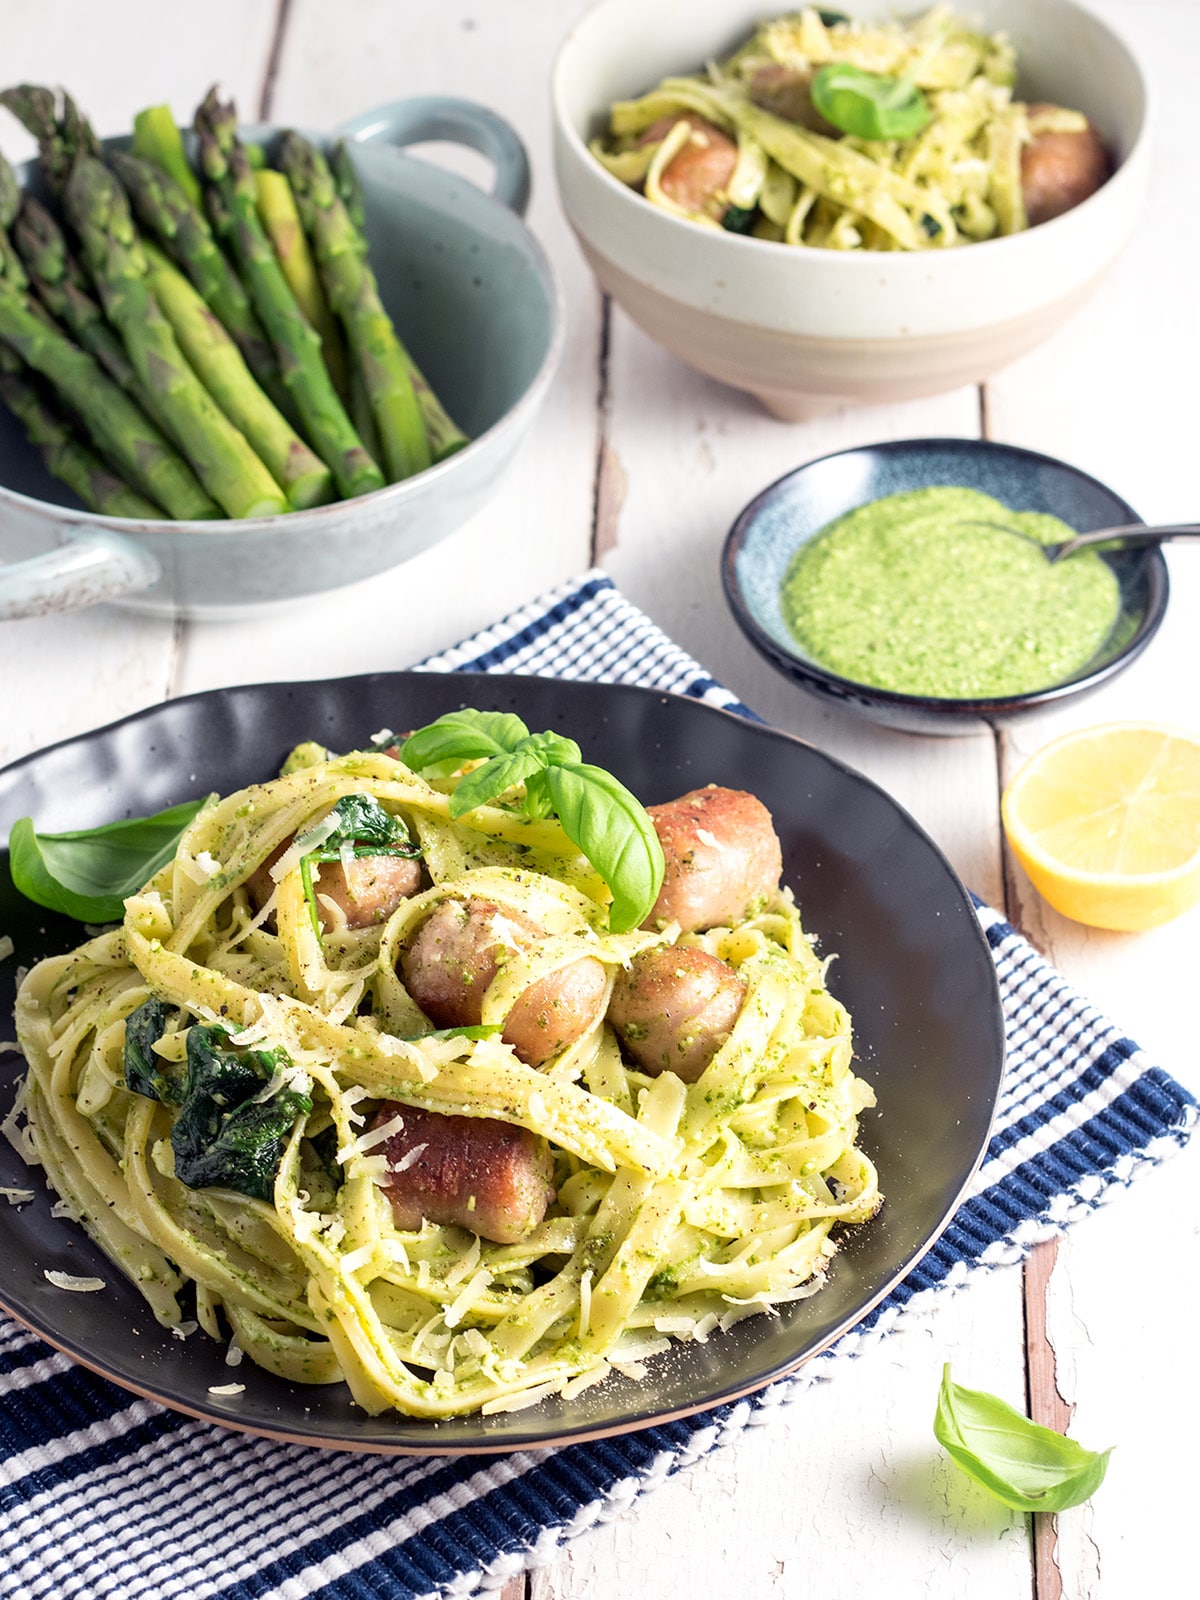 This simple spinach pesto pasta meal is full of fresh, summery flavours. Eating your greens has never been so easy (or so tasty).